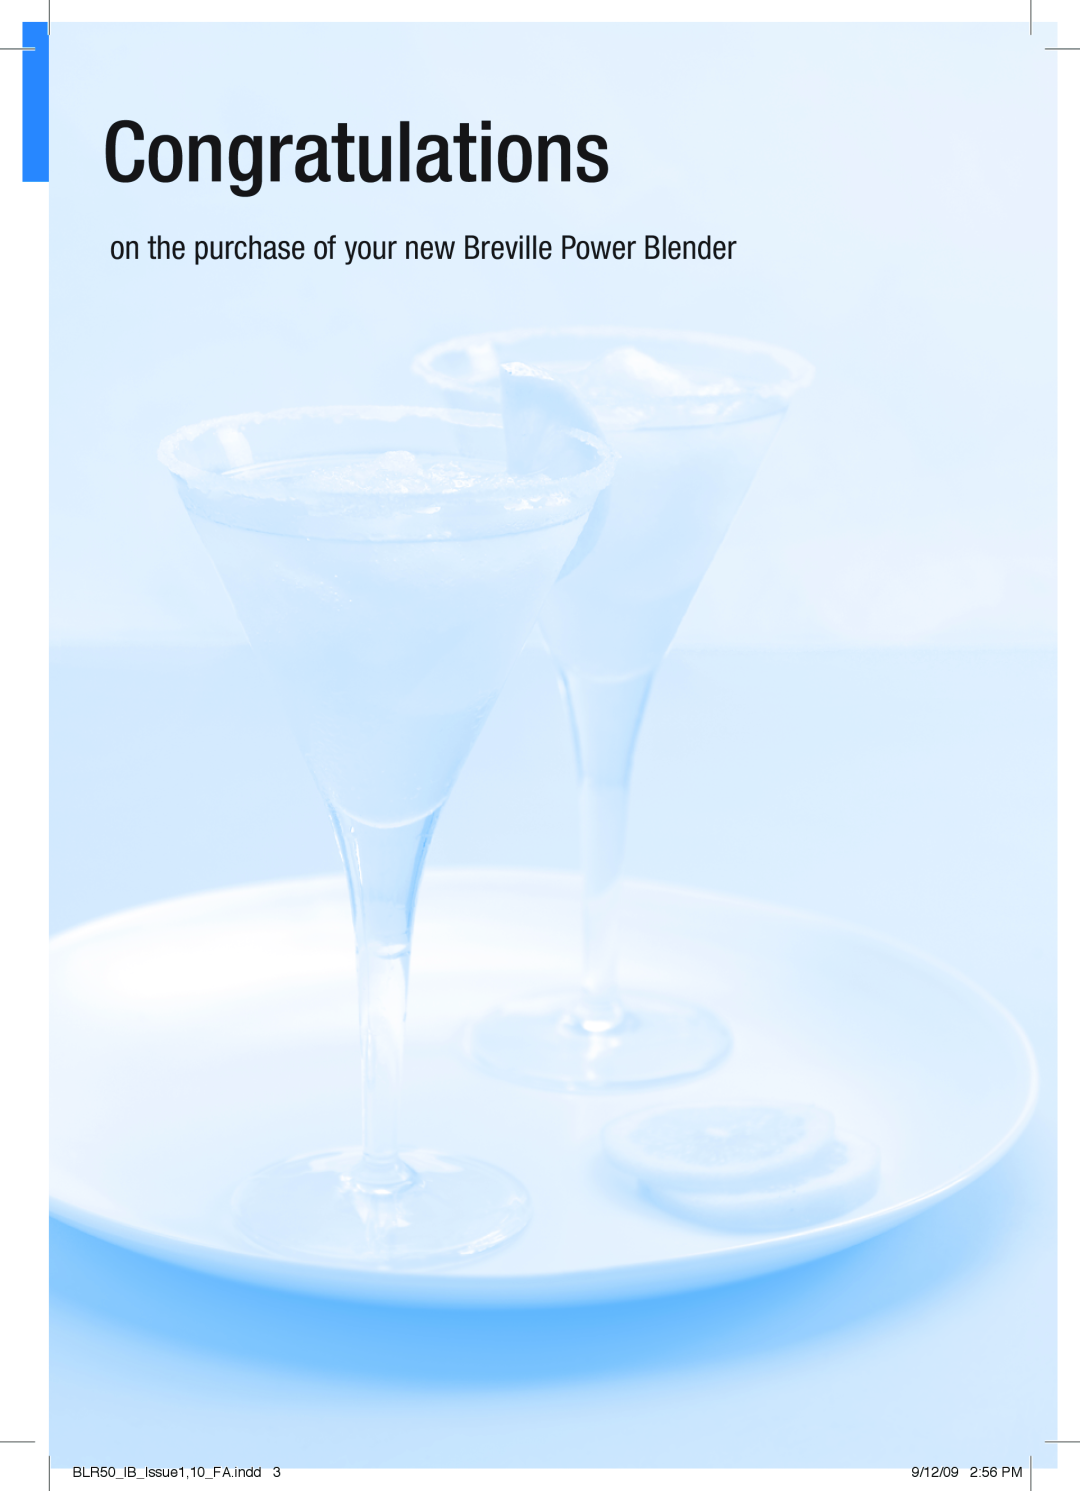 Breville Congratulations, on the purchase of your new Breville Power Blender, BLR50IBIssue1,10FA.indd, 9/12/09, 256 PM 